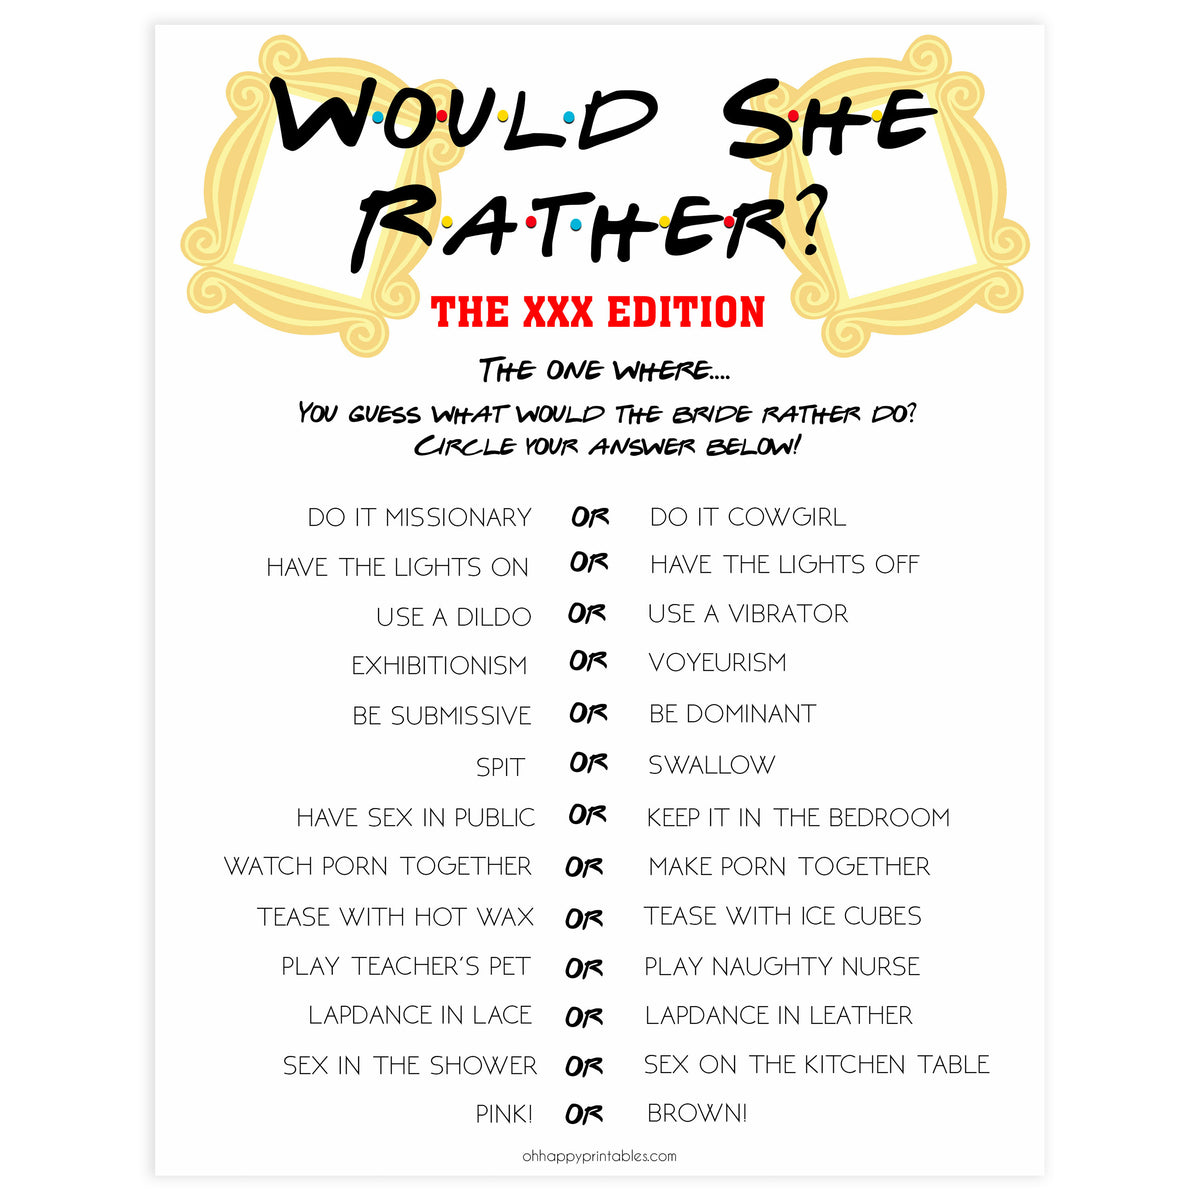 dirty would she rather, adult would she rather game, Printable bachelorette games, friends bachelorette, friends hen party games, fun hen party games, bachelorette game ideas, friends adult party games, naughty hen games, naughty bachelorette games